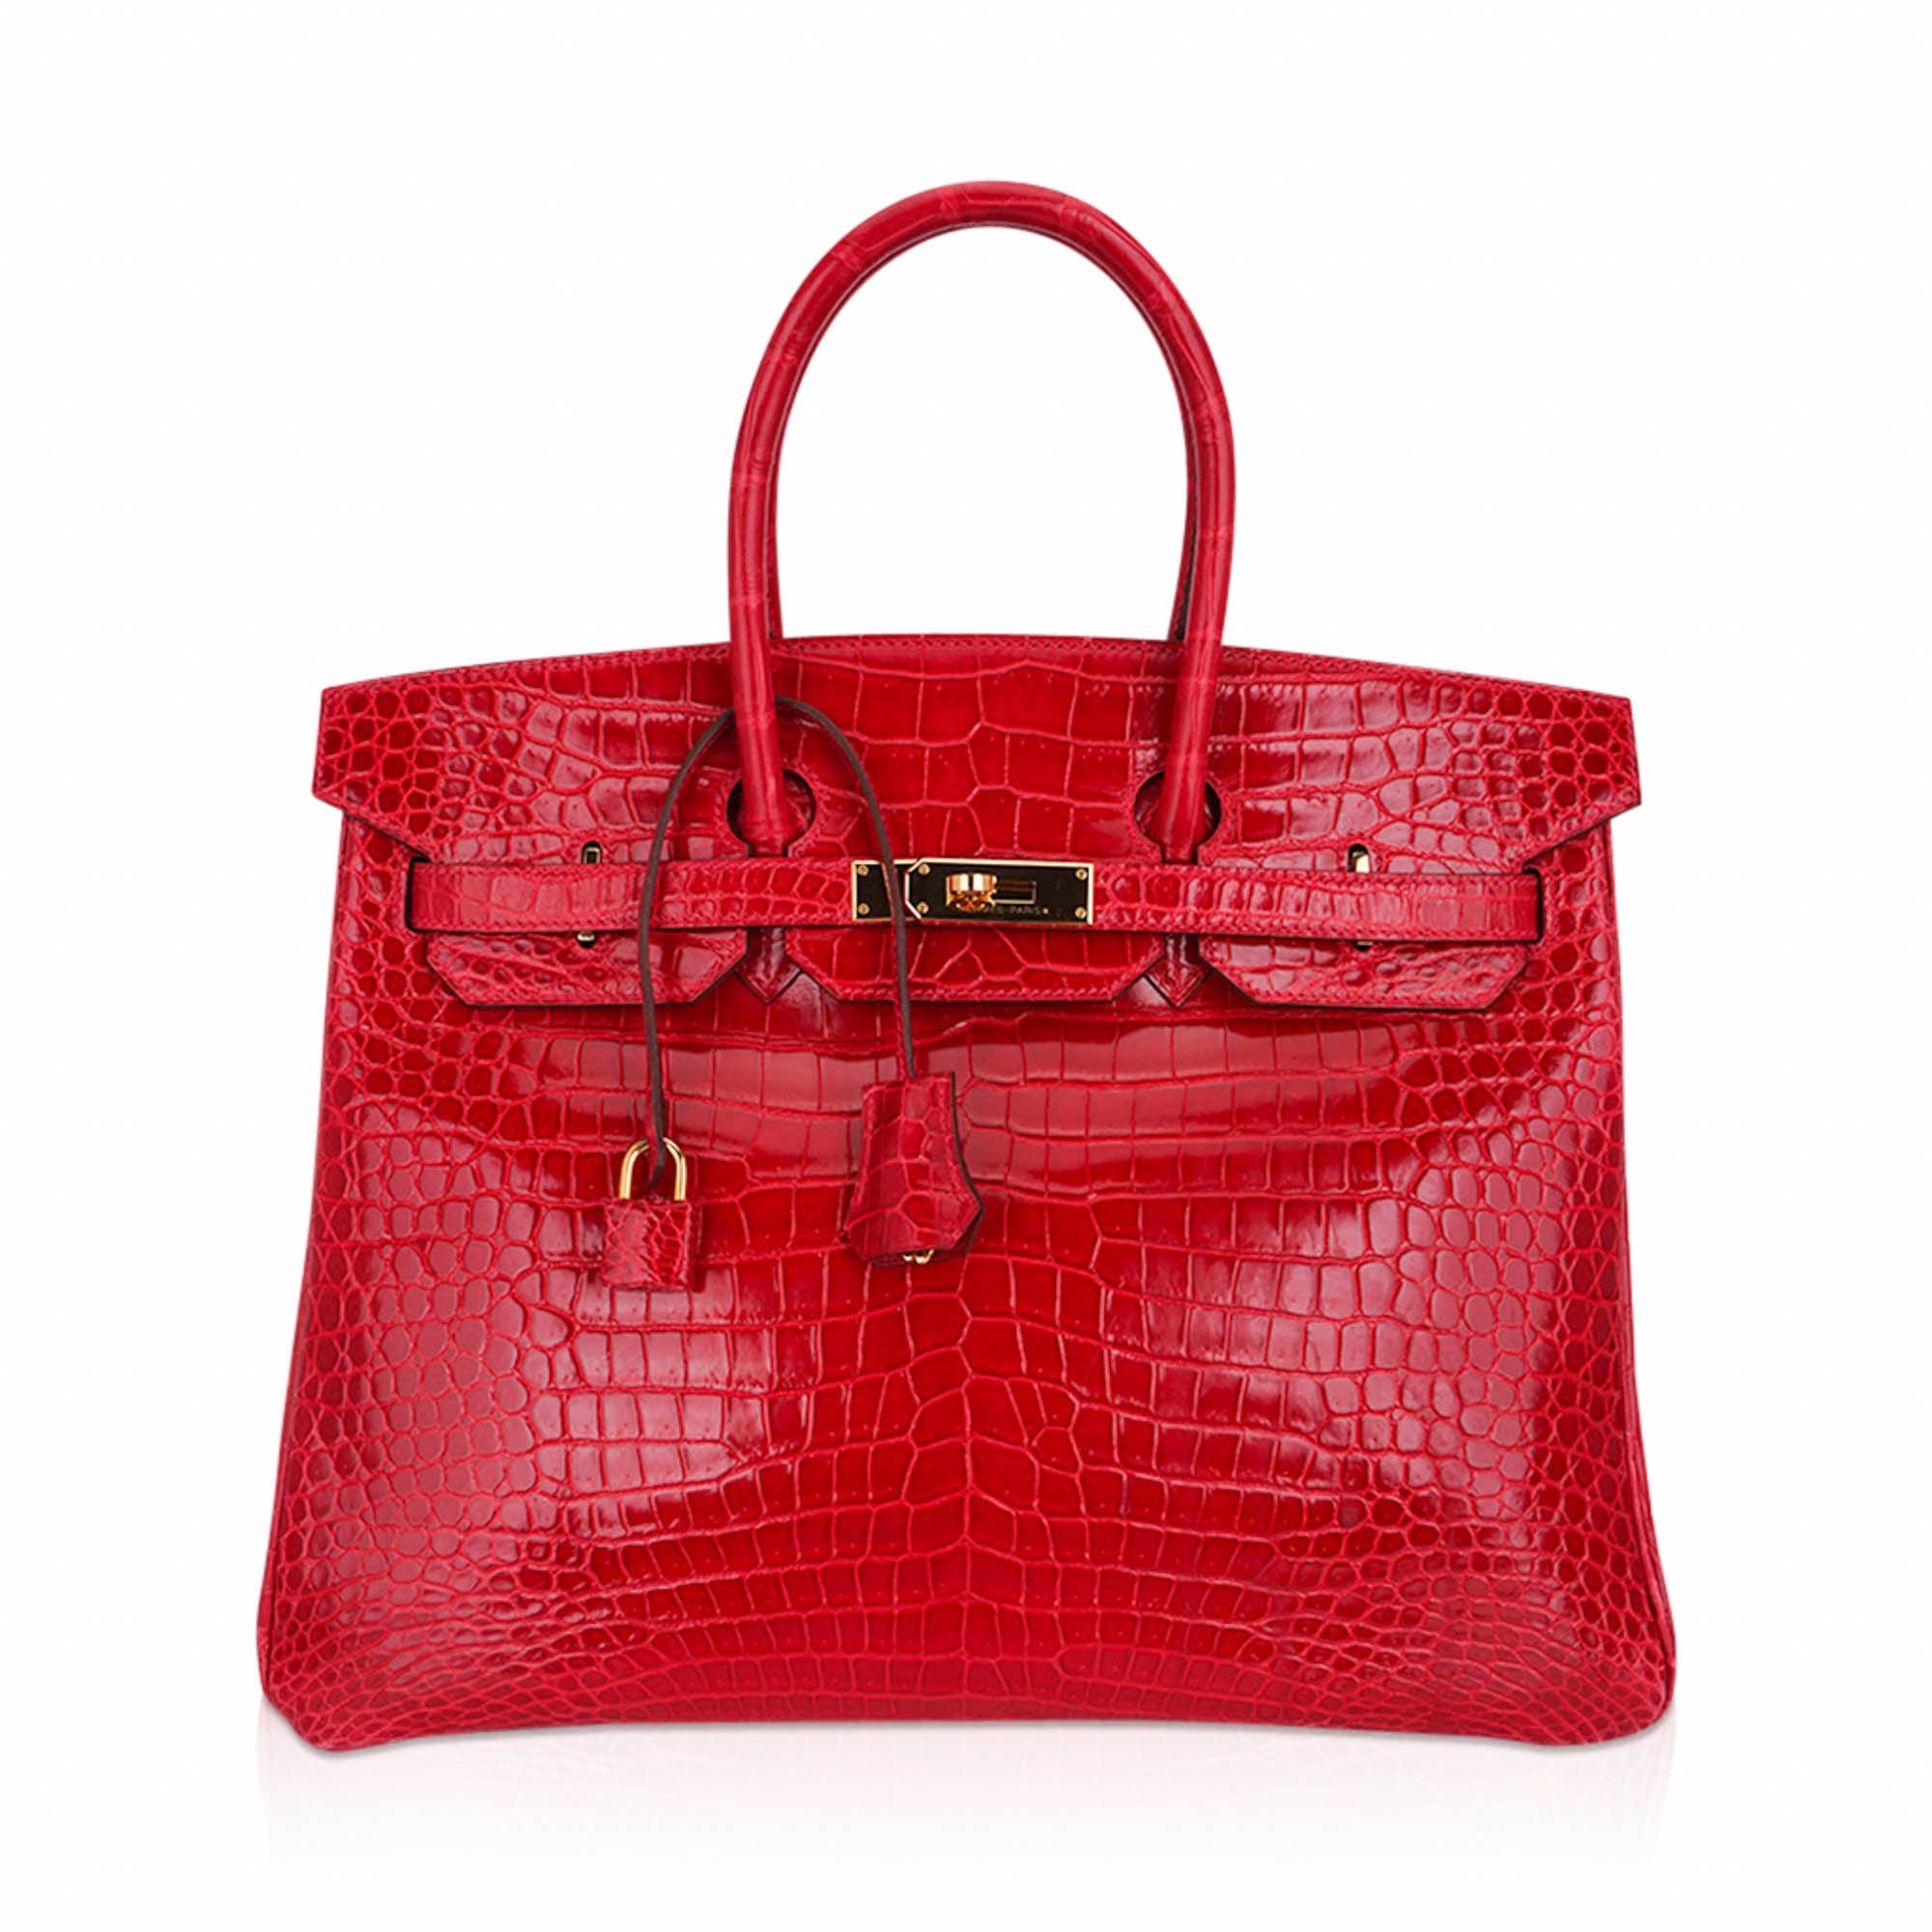 Buy Red Croc Lock Chain Party Bag Online - Accessorize India